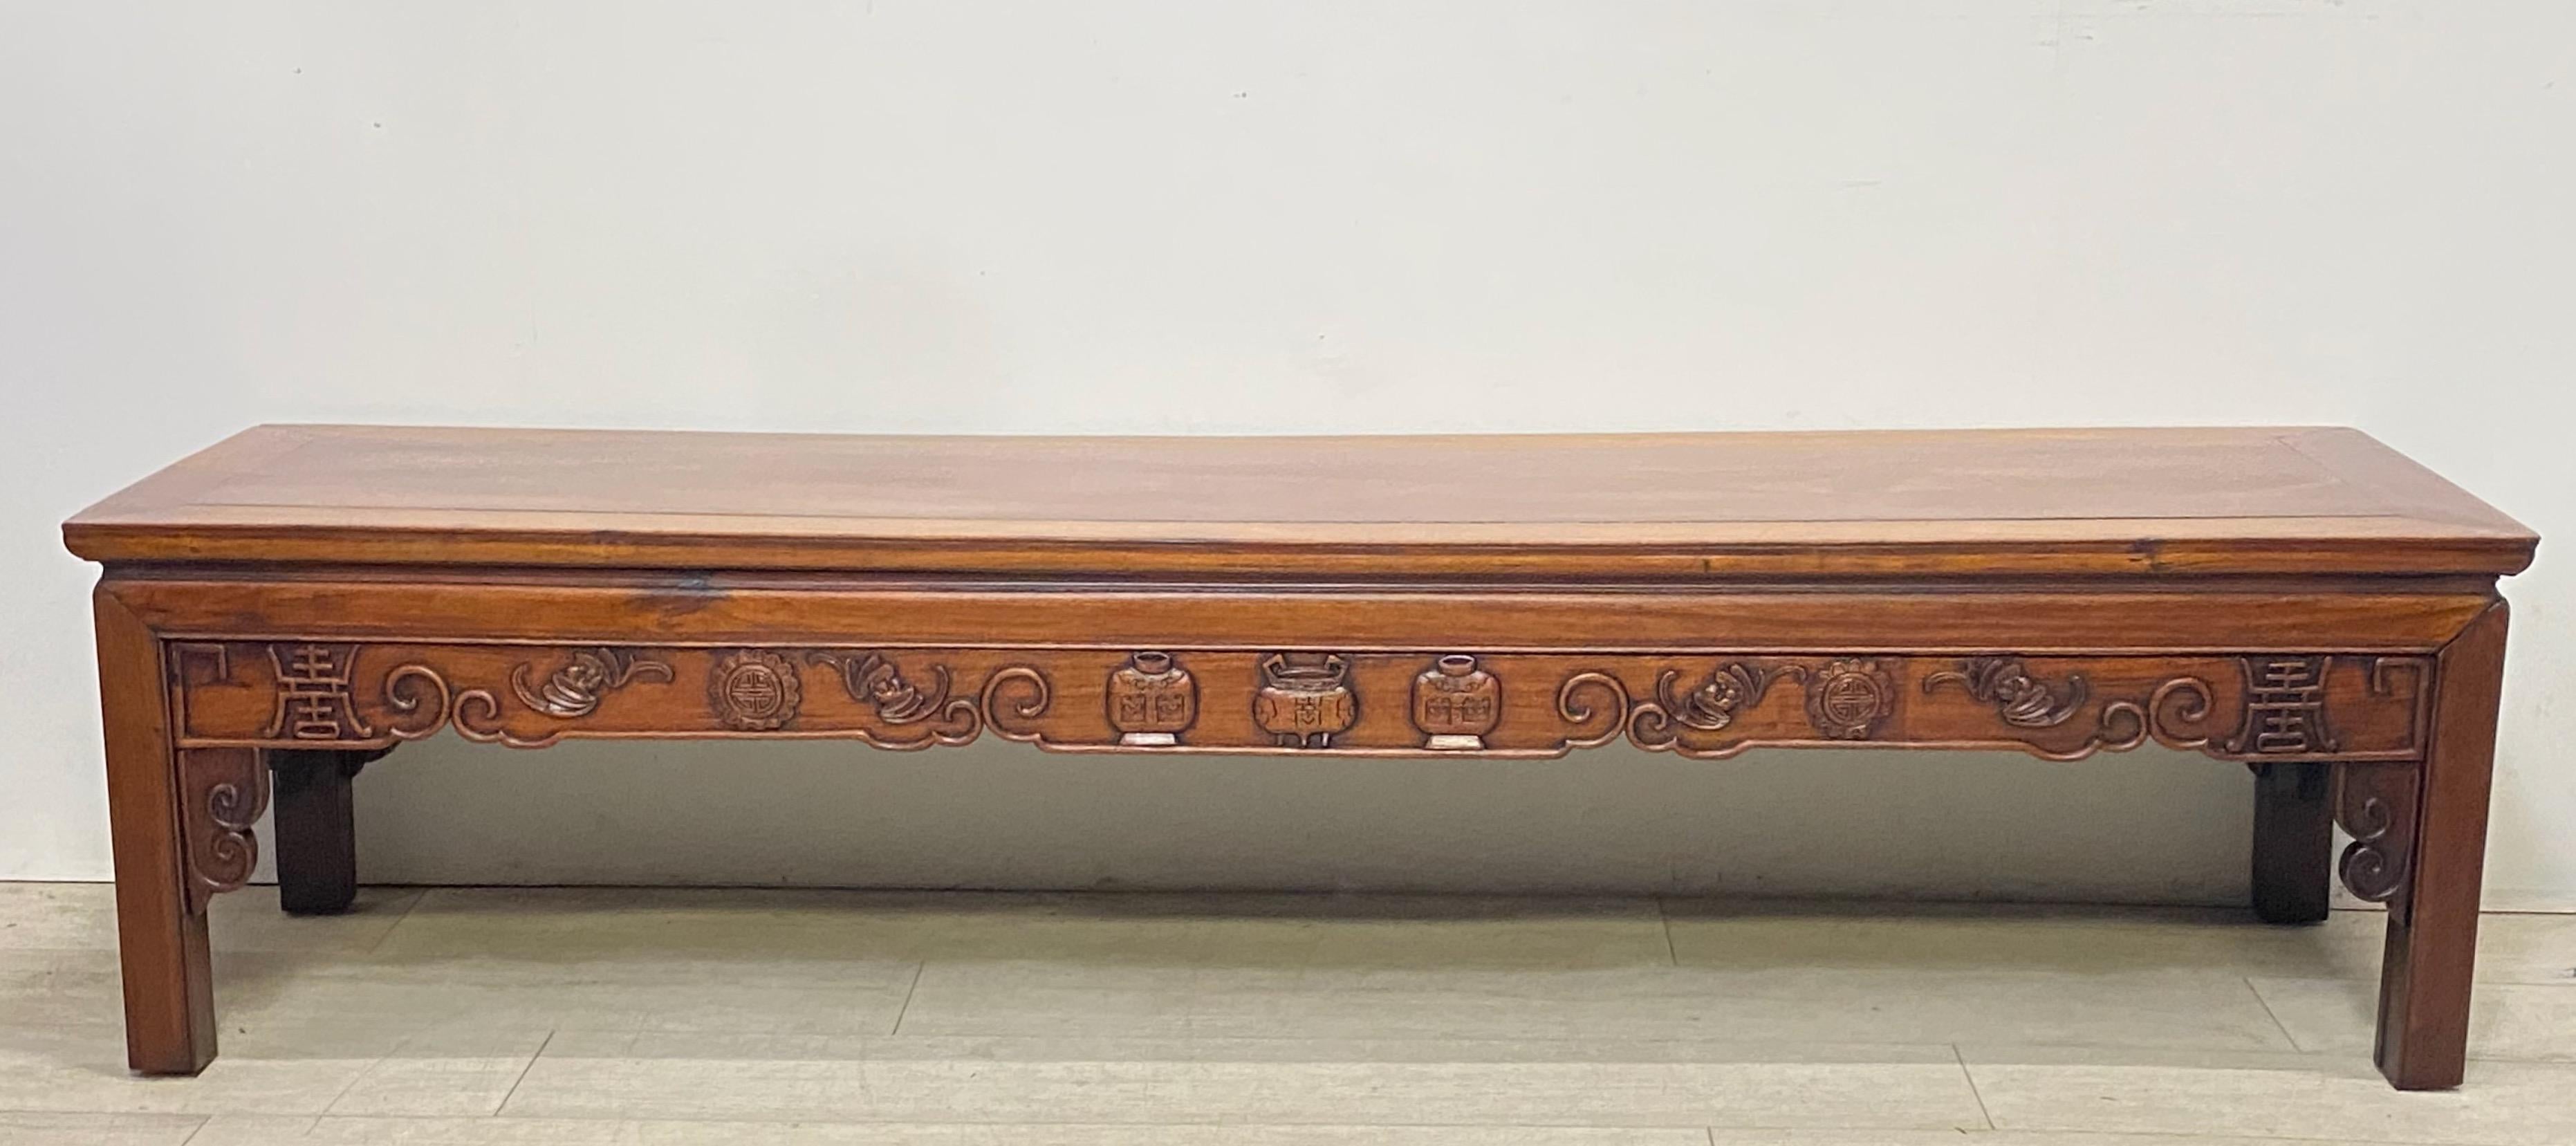 Chinese Rosewood Long Low Table or Bench, Late 19th to Early 20th Century 5